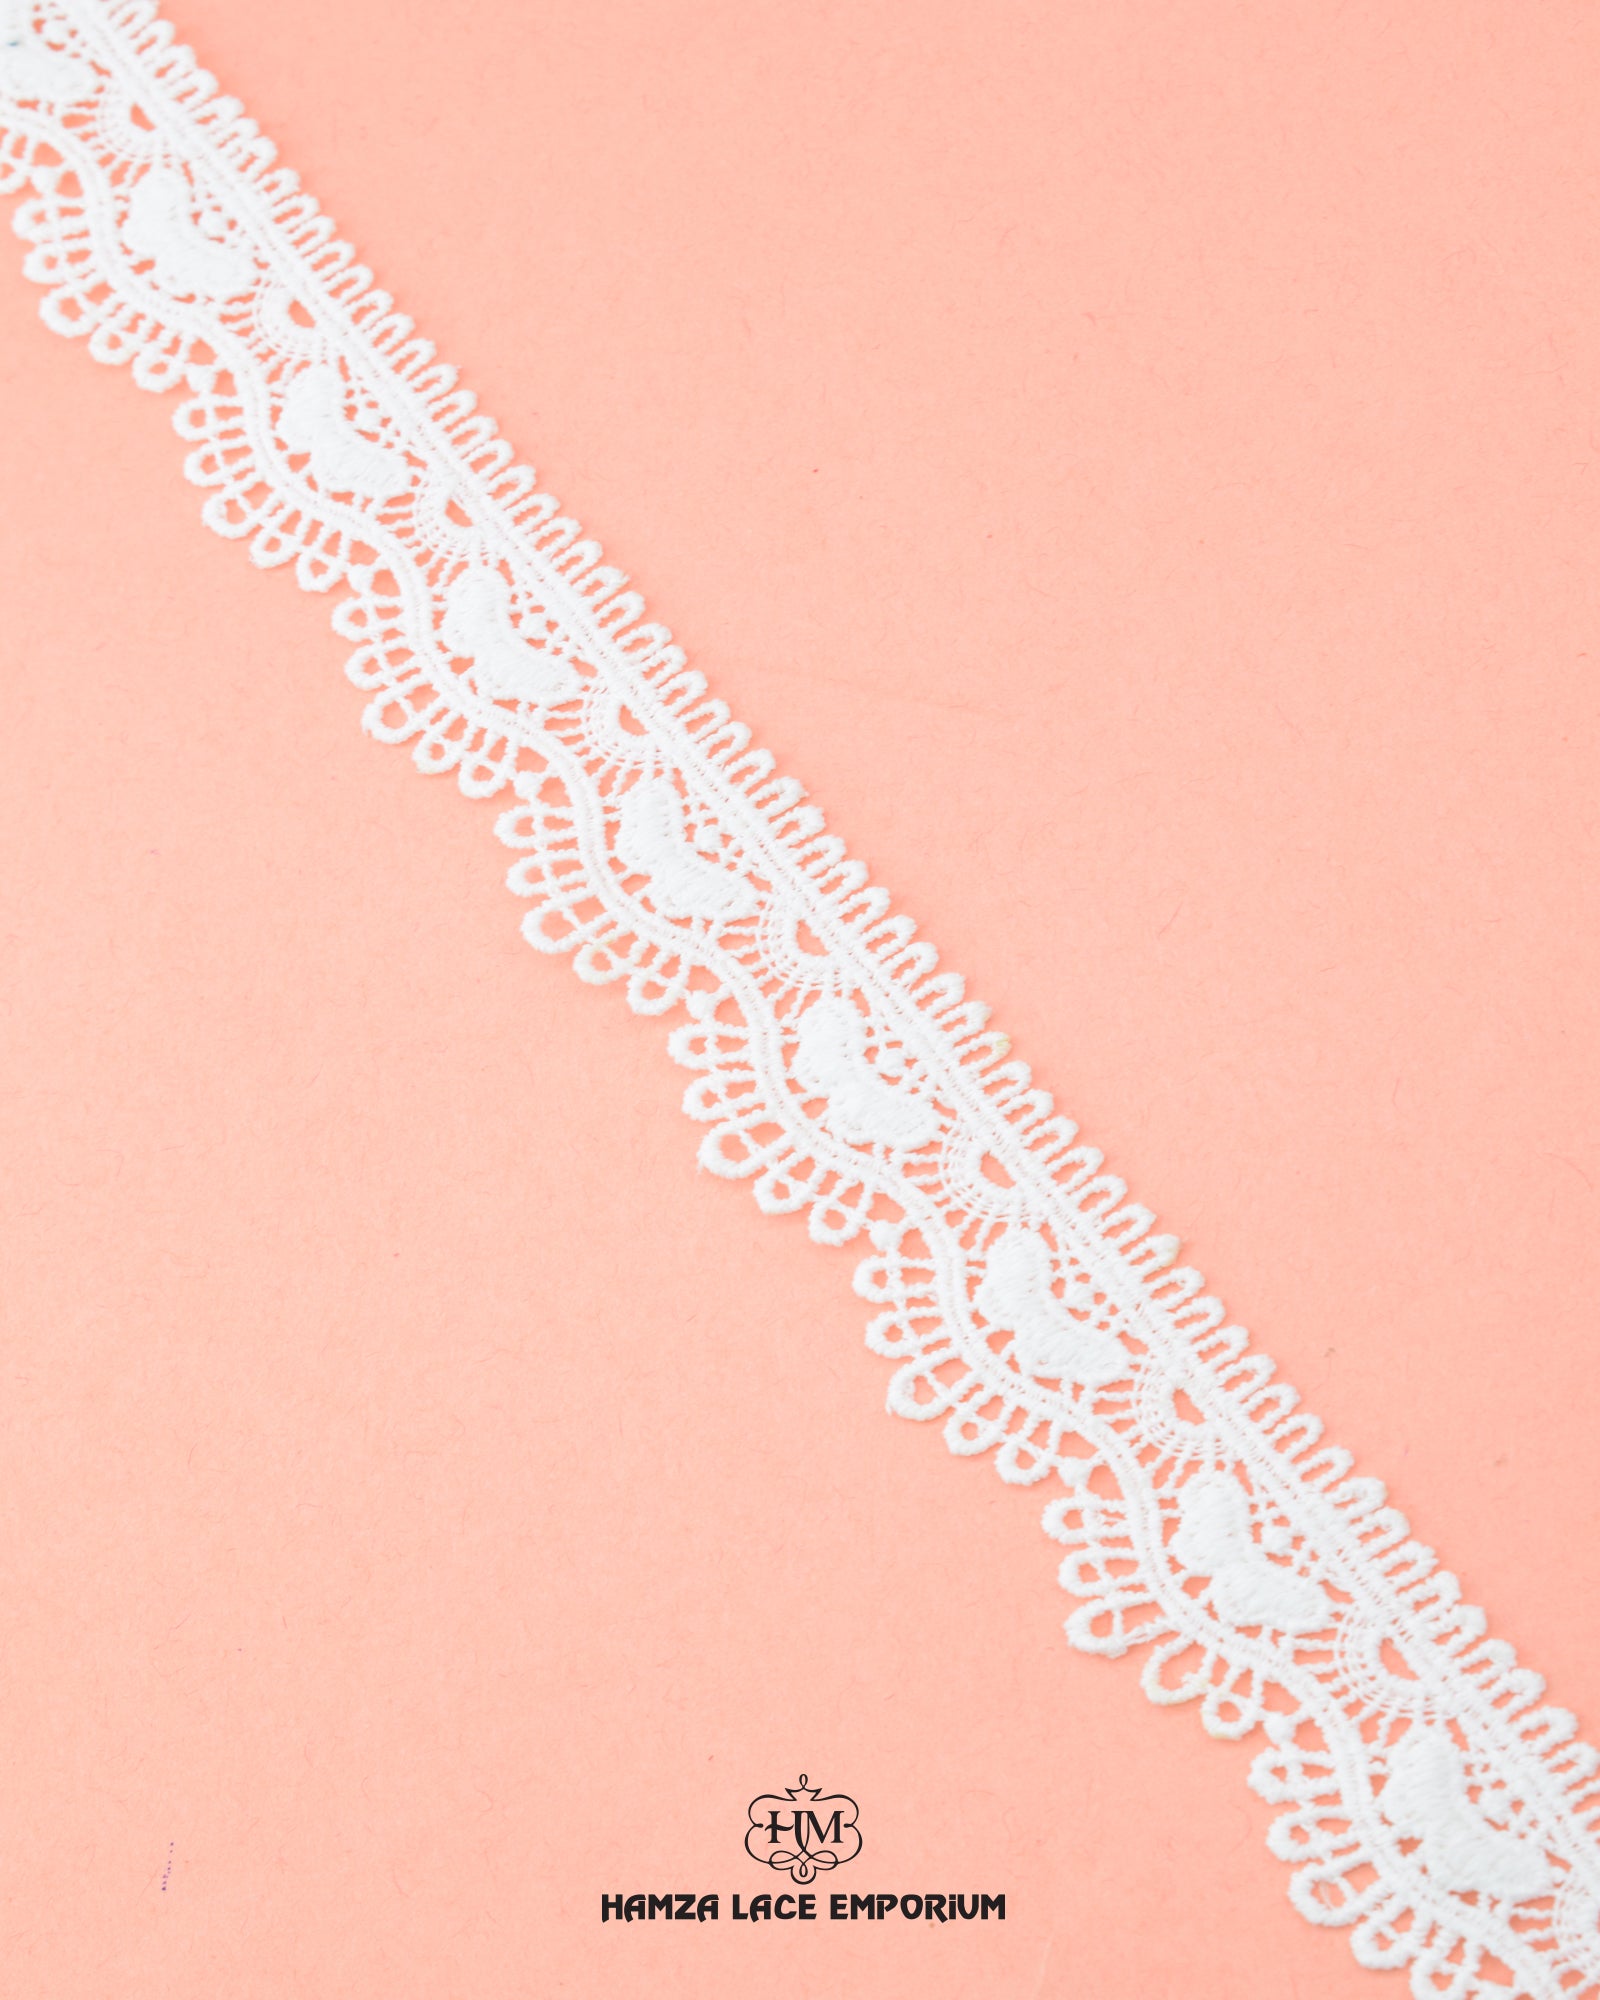 'Edging Lace 3533' with the 'Hamza Lace' sign